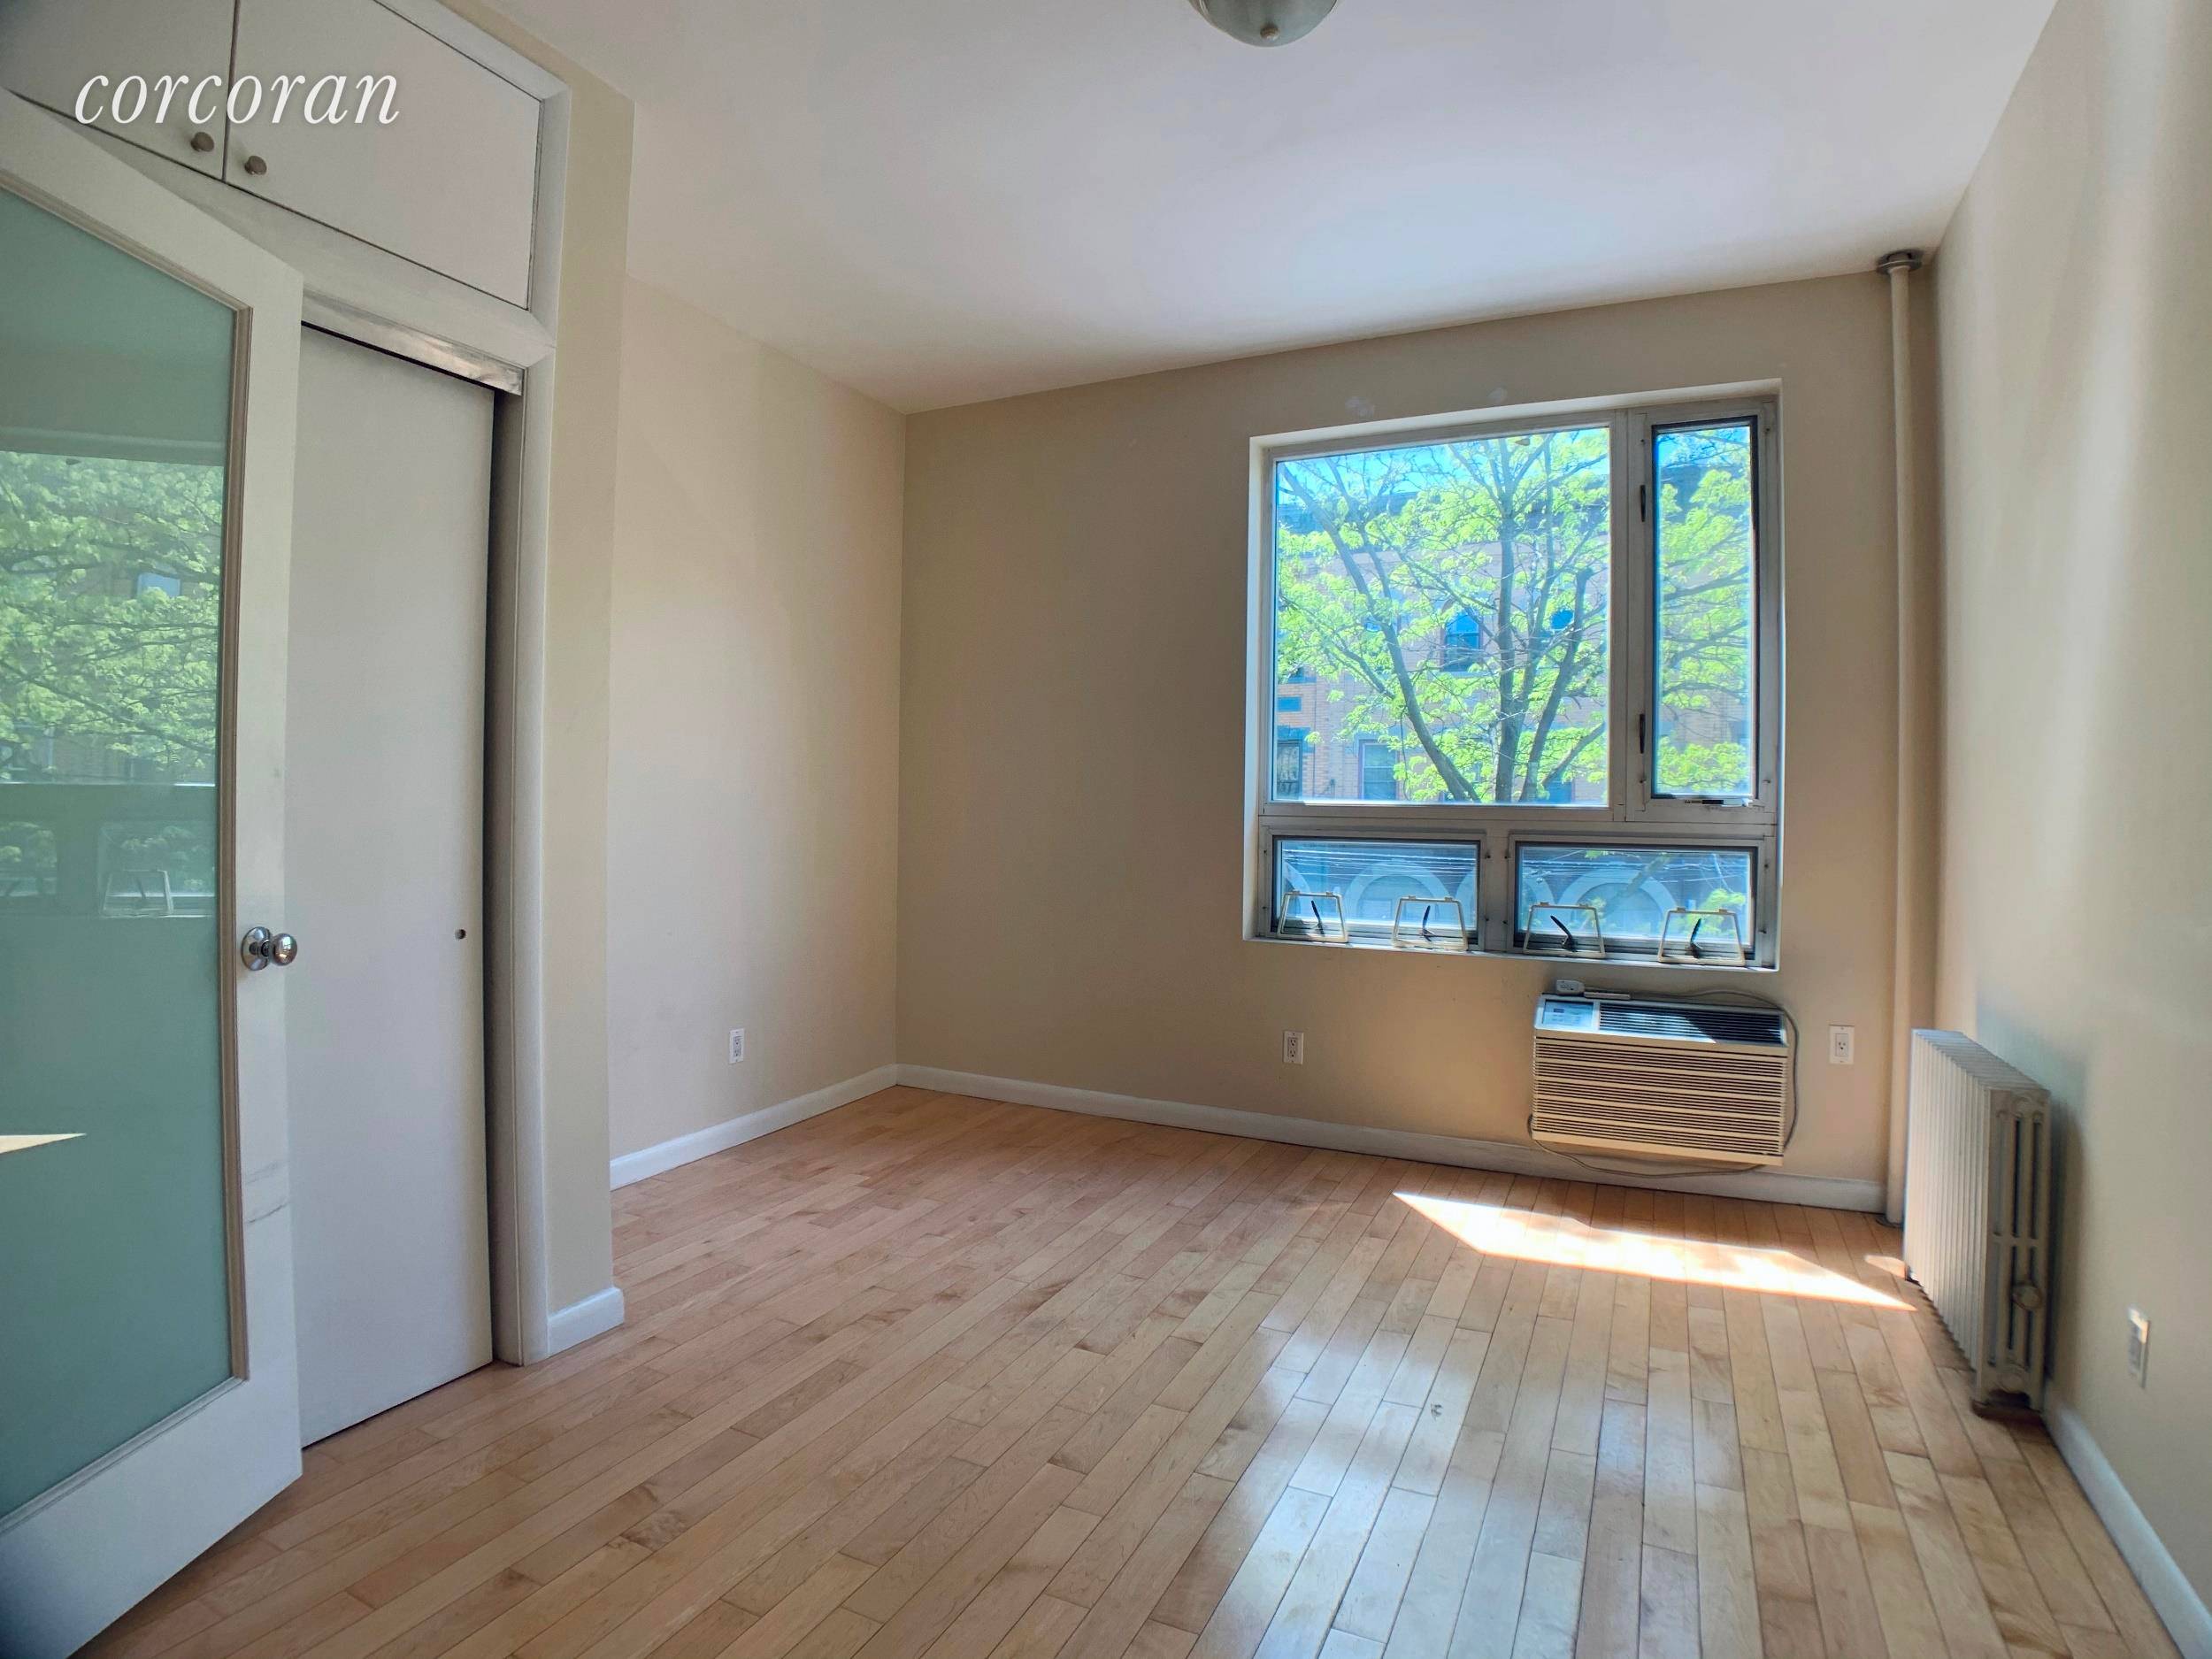 Delightful and sunny Split Layout Two Bedroom Floor through apartment on Kingsland Avenue in Greenpoint.